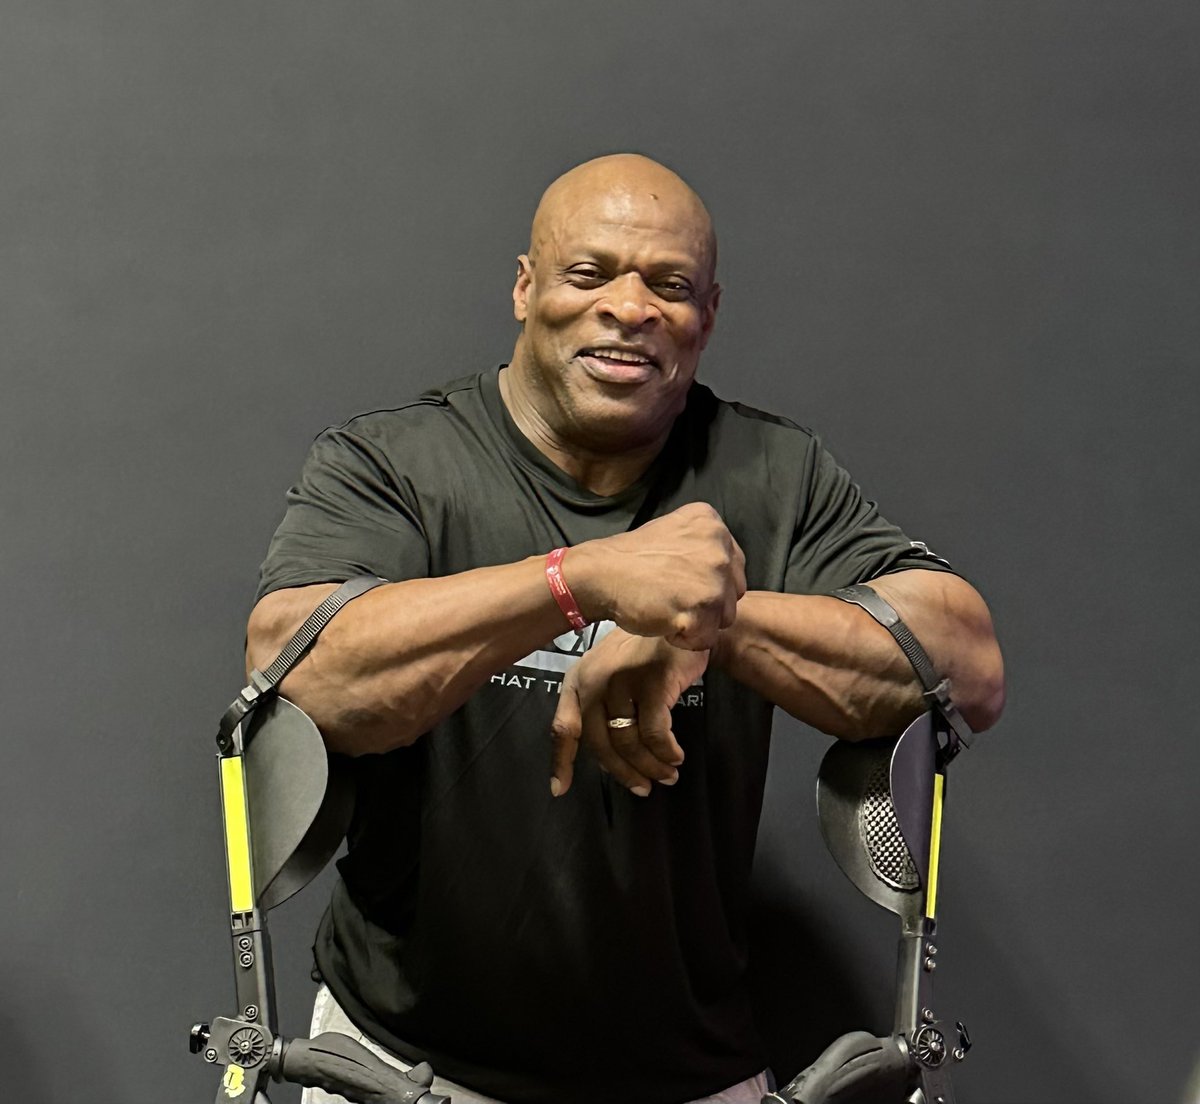 Oh hey Ronnie Coleman. Thanks for reppin’ that #ShrinersChildrens wristband. #yeahbuddy